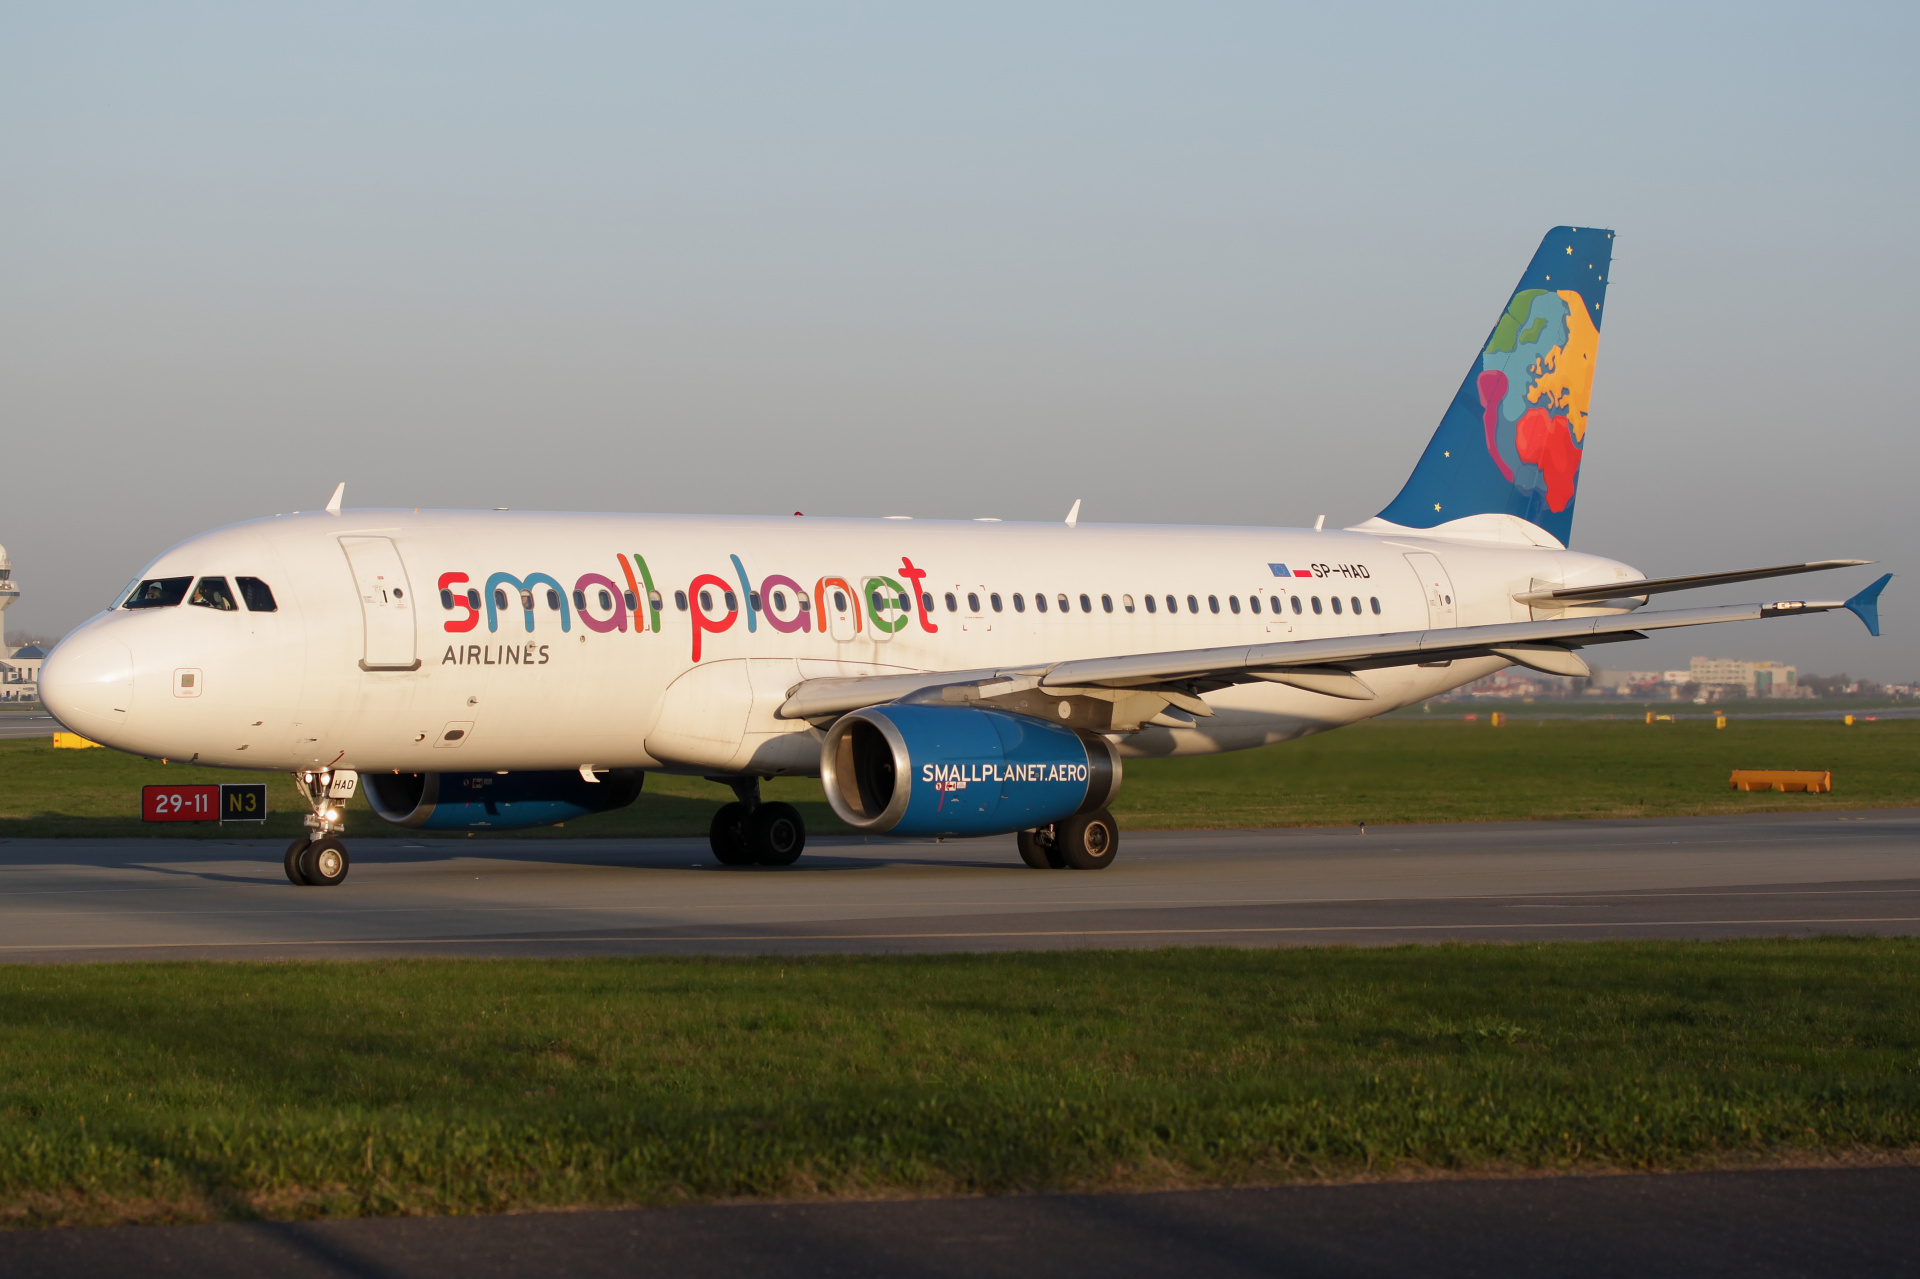 SP-HAD (Aircraft » EPWA Spotting » Airbus A320-200 » Small Planet Airlines)